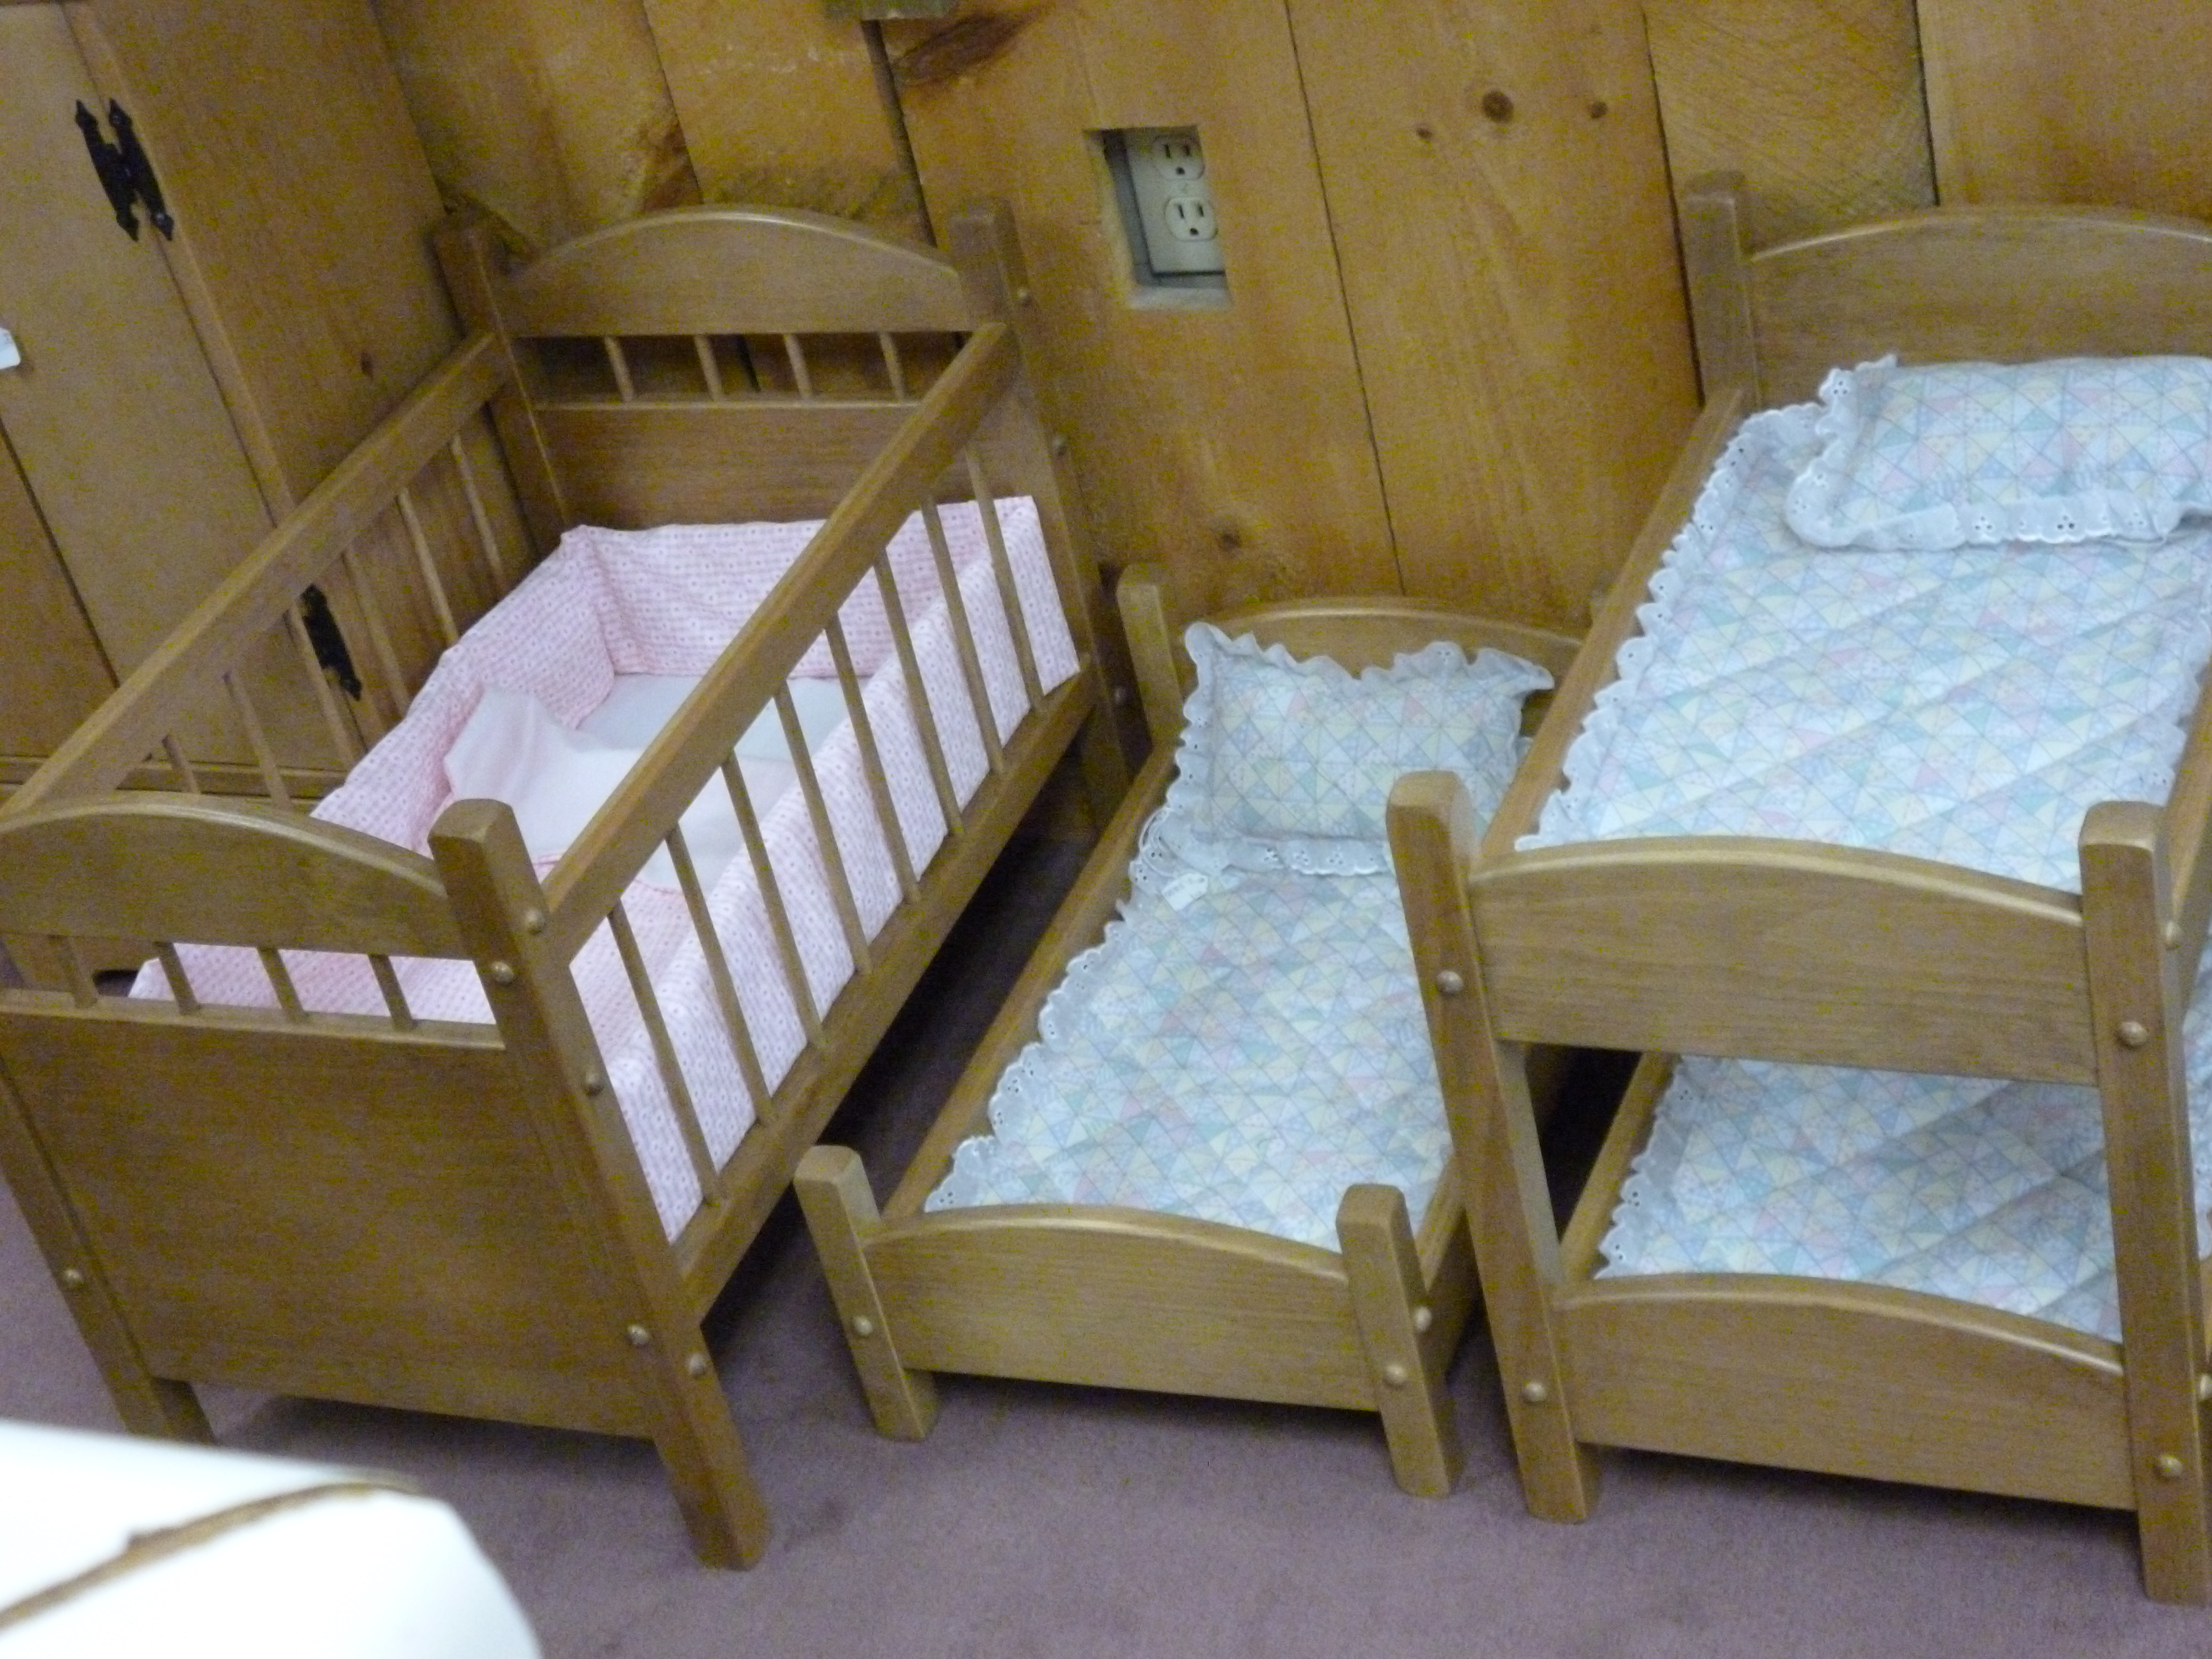 crib size bunk beds